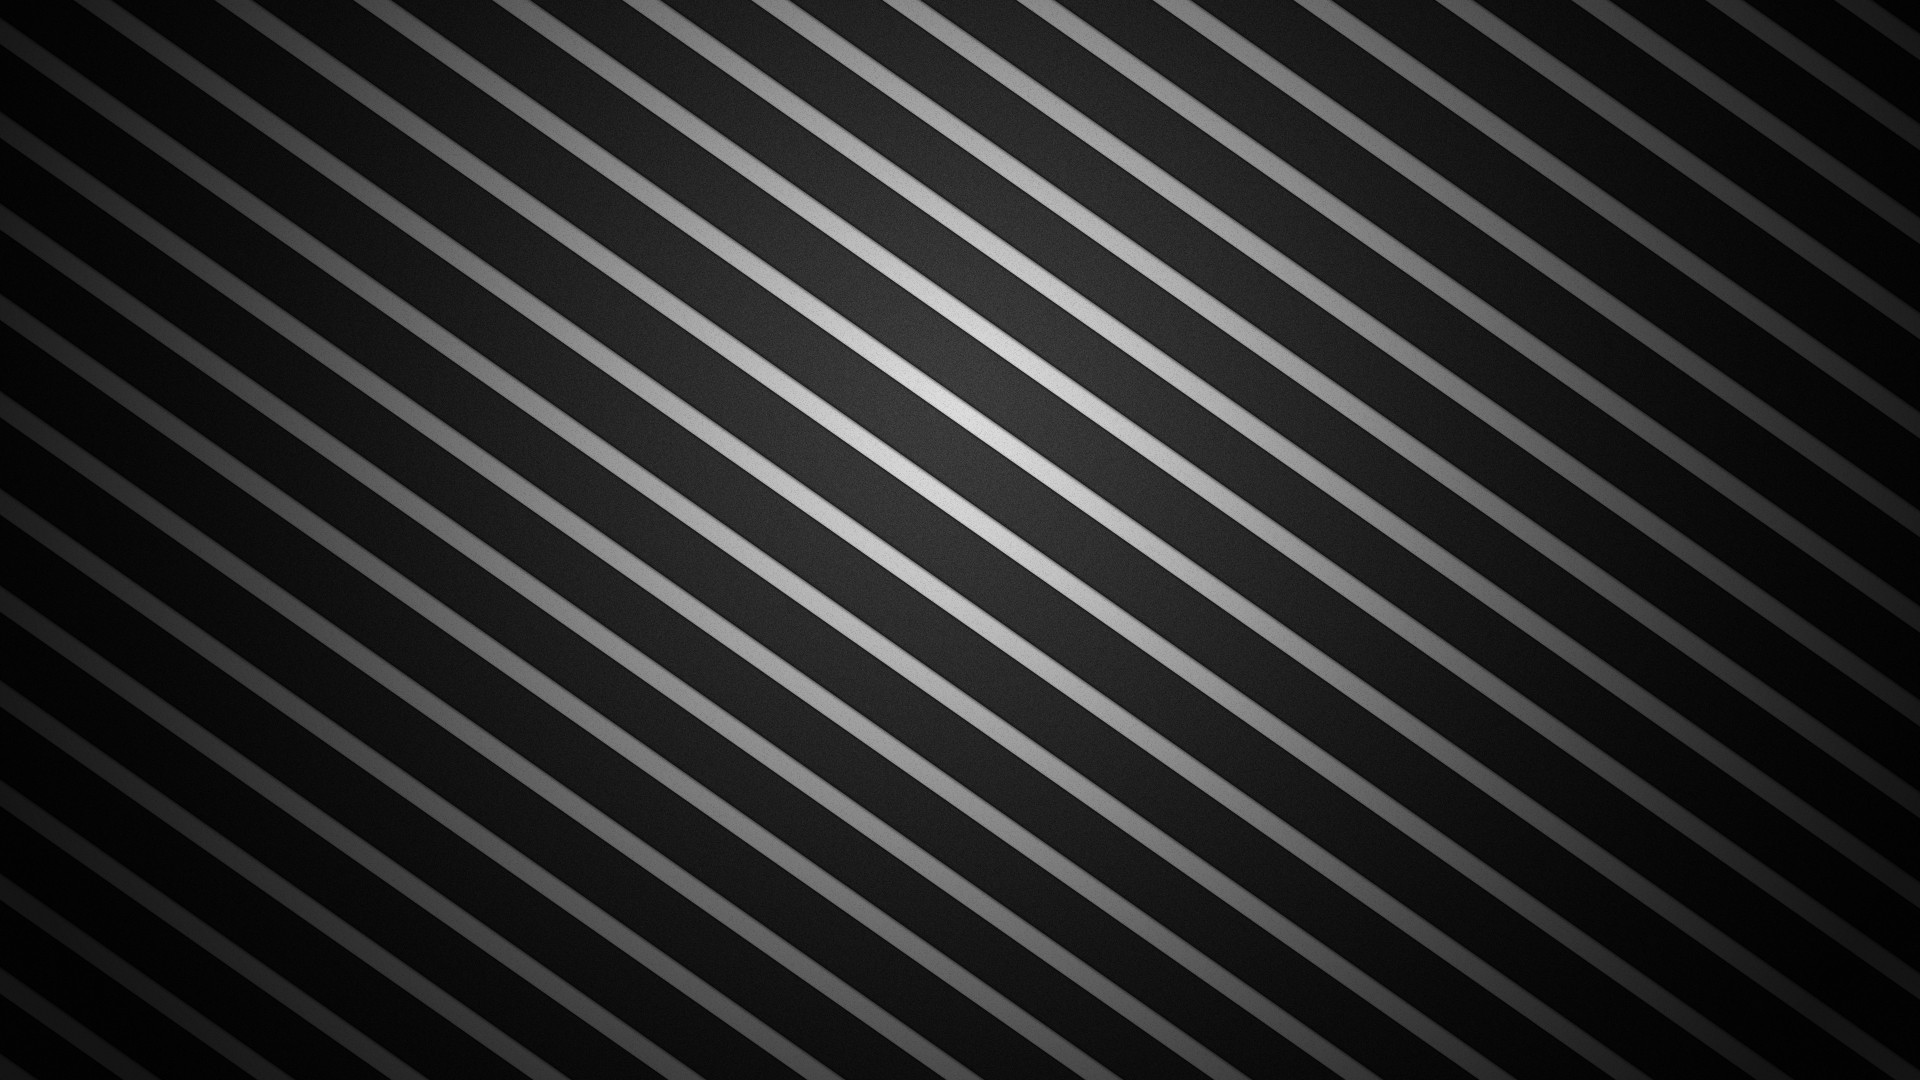 Abstract Black Wallpaper 1920x1080 Abstract Black Striped Texture